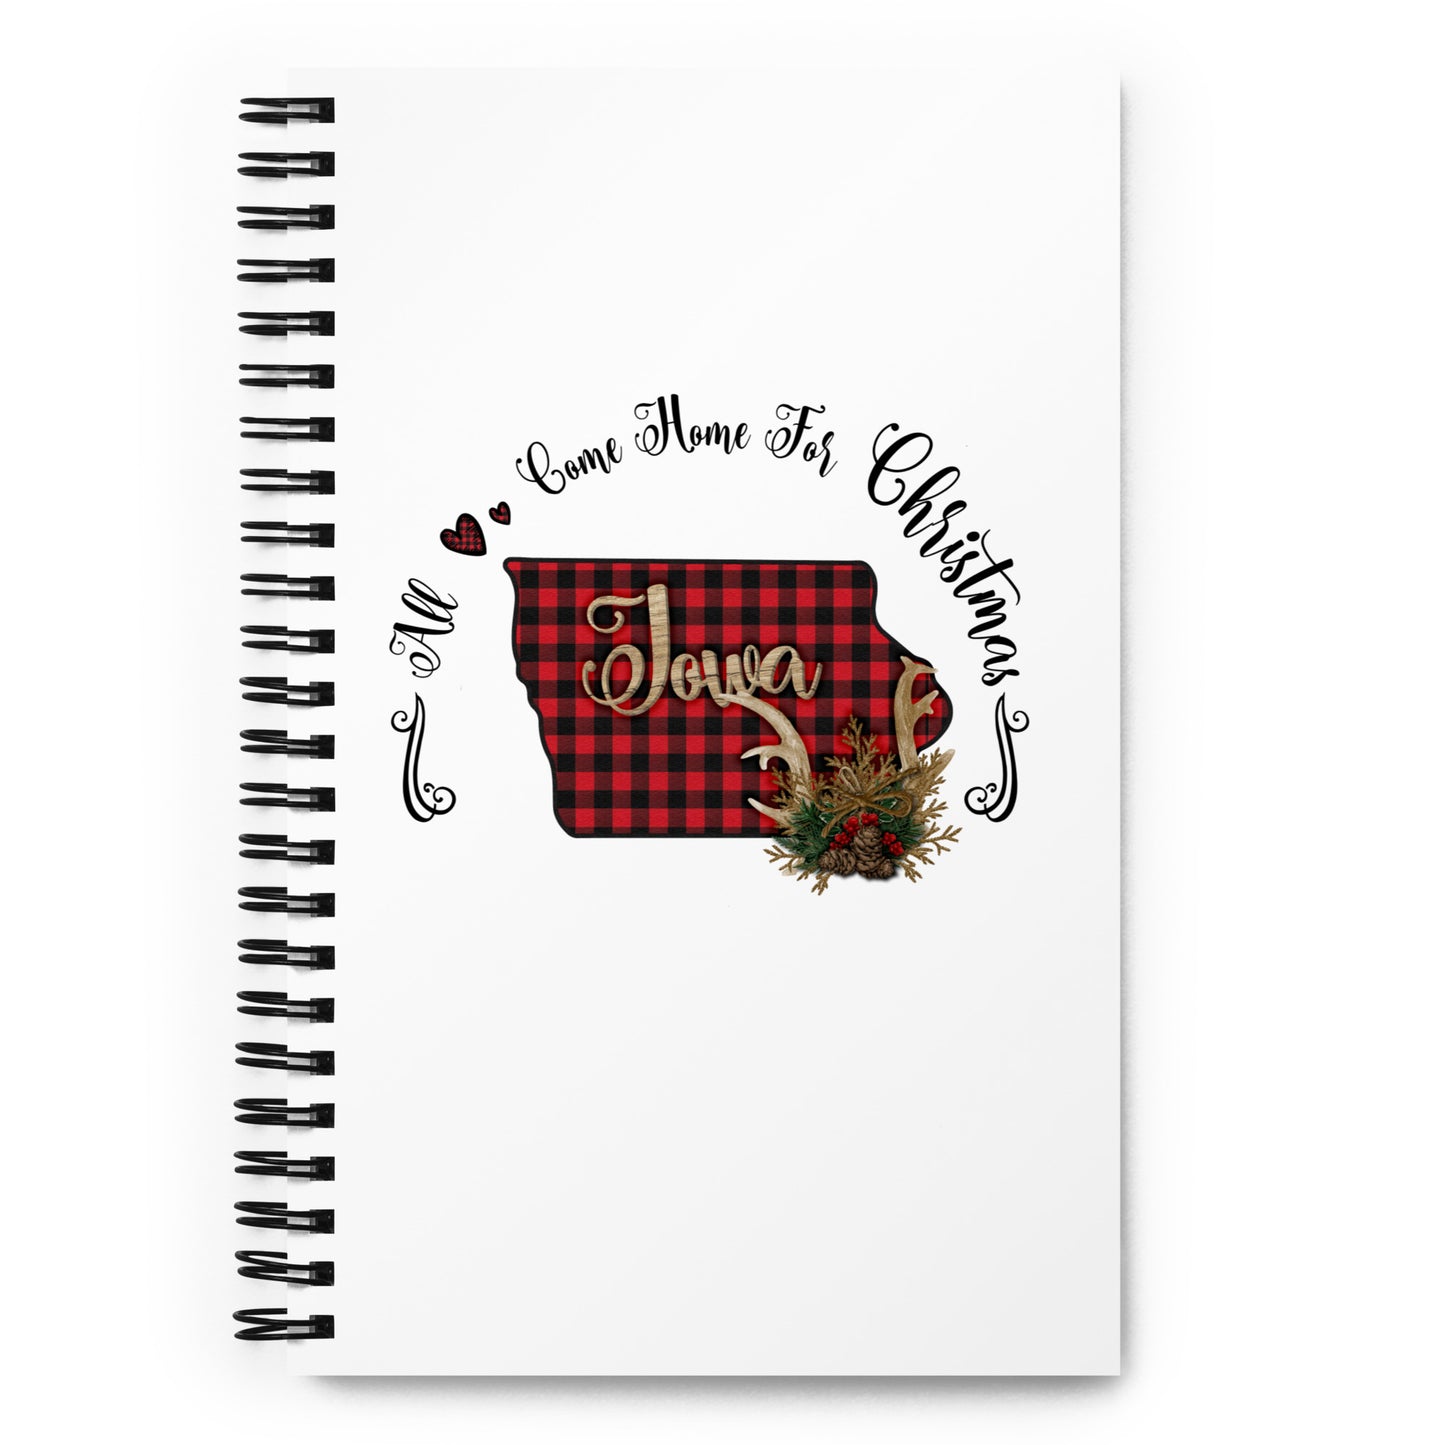 Iowa All Come Home for Christmas Spiral notebook